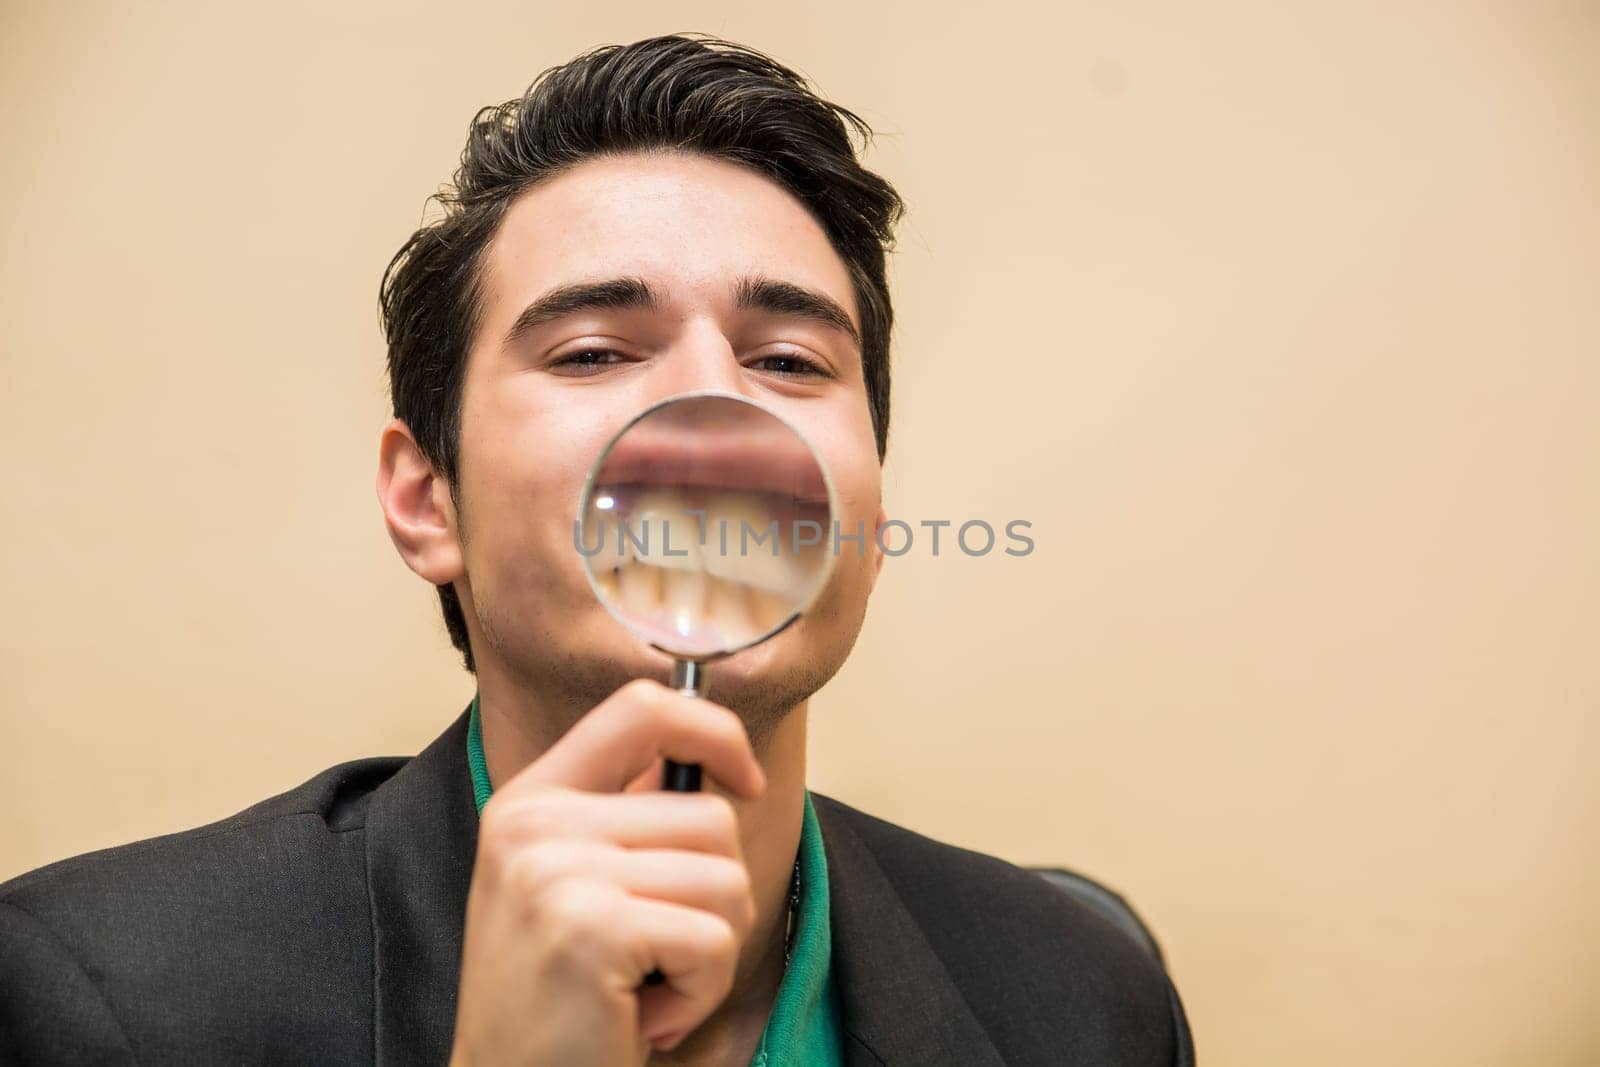 A young man exposing his teeth and mouth through a magnifying glass and smiling